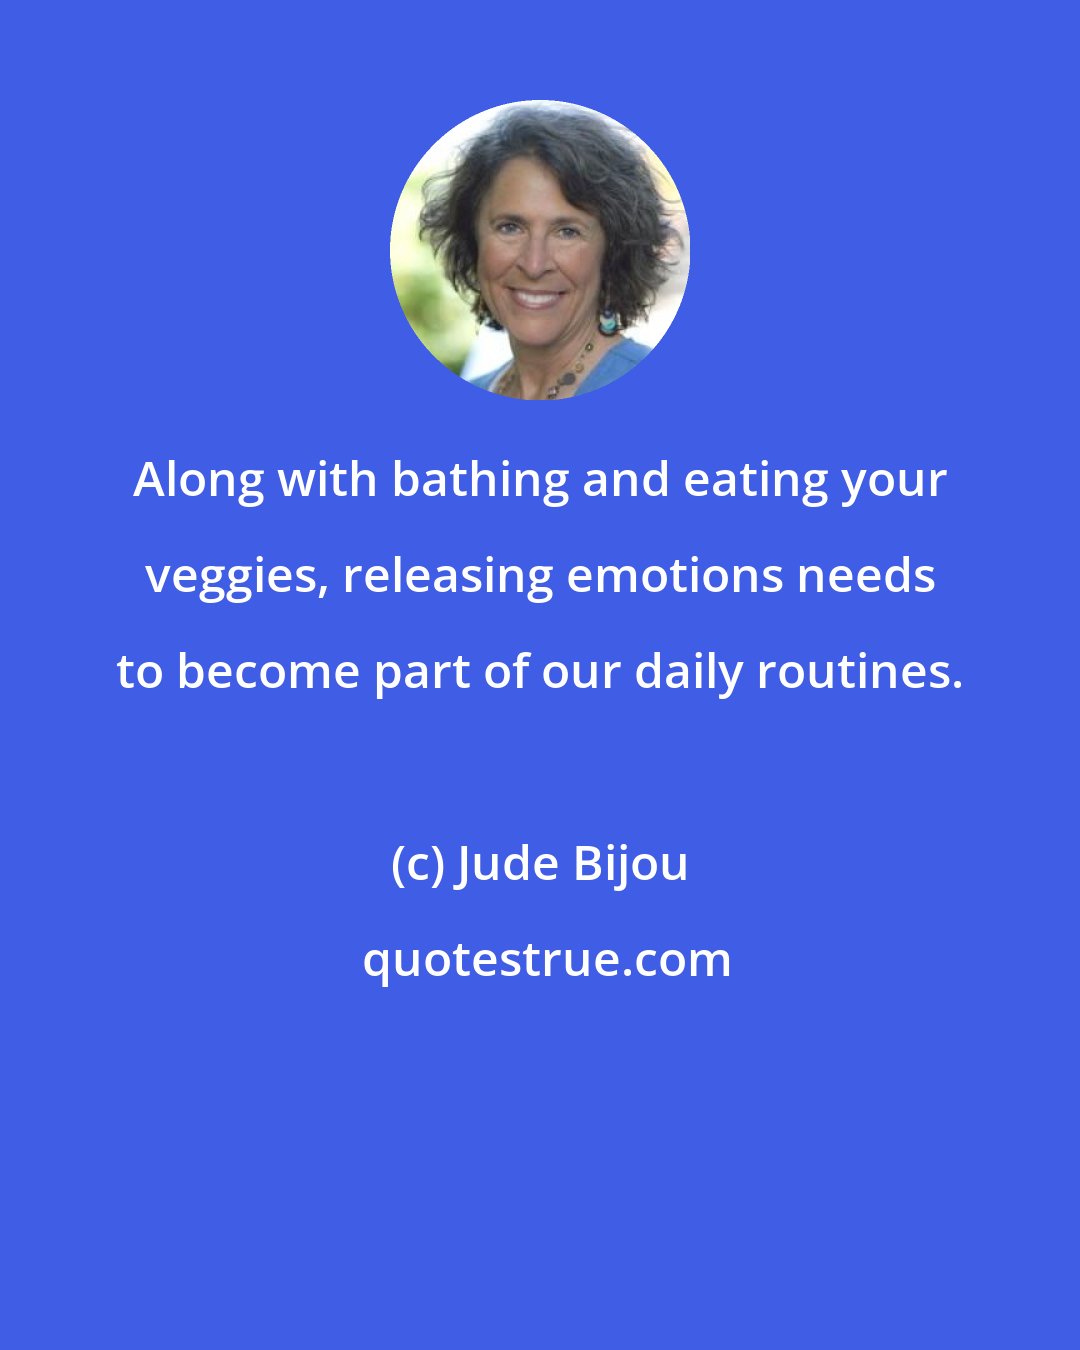 Jude Bijou: Along with bathing and eating your veggies, releasing emotions needs to become part of our daily routines.